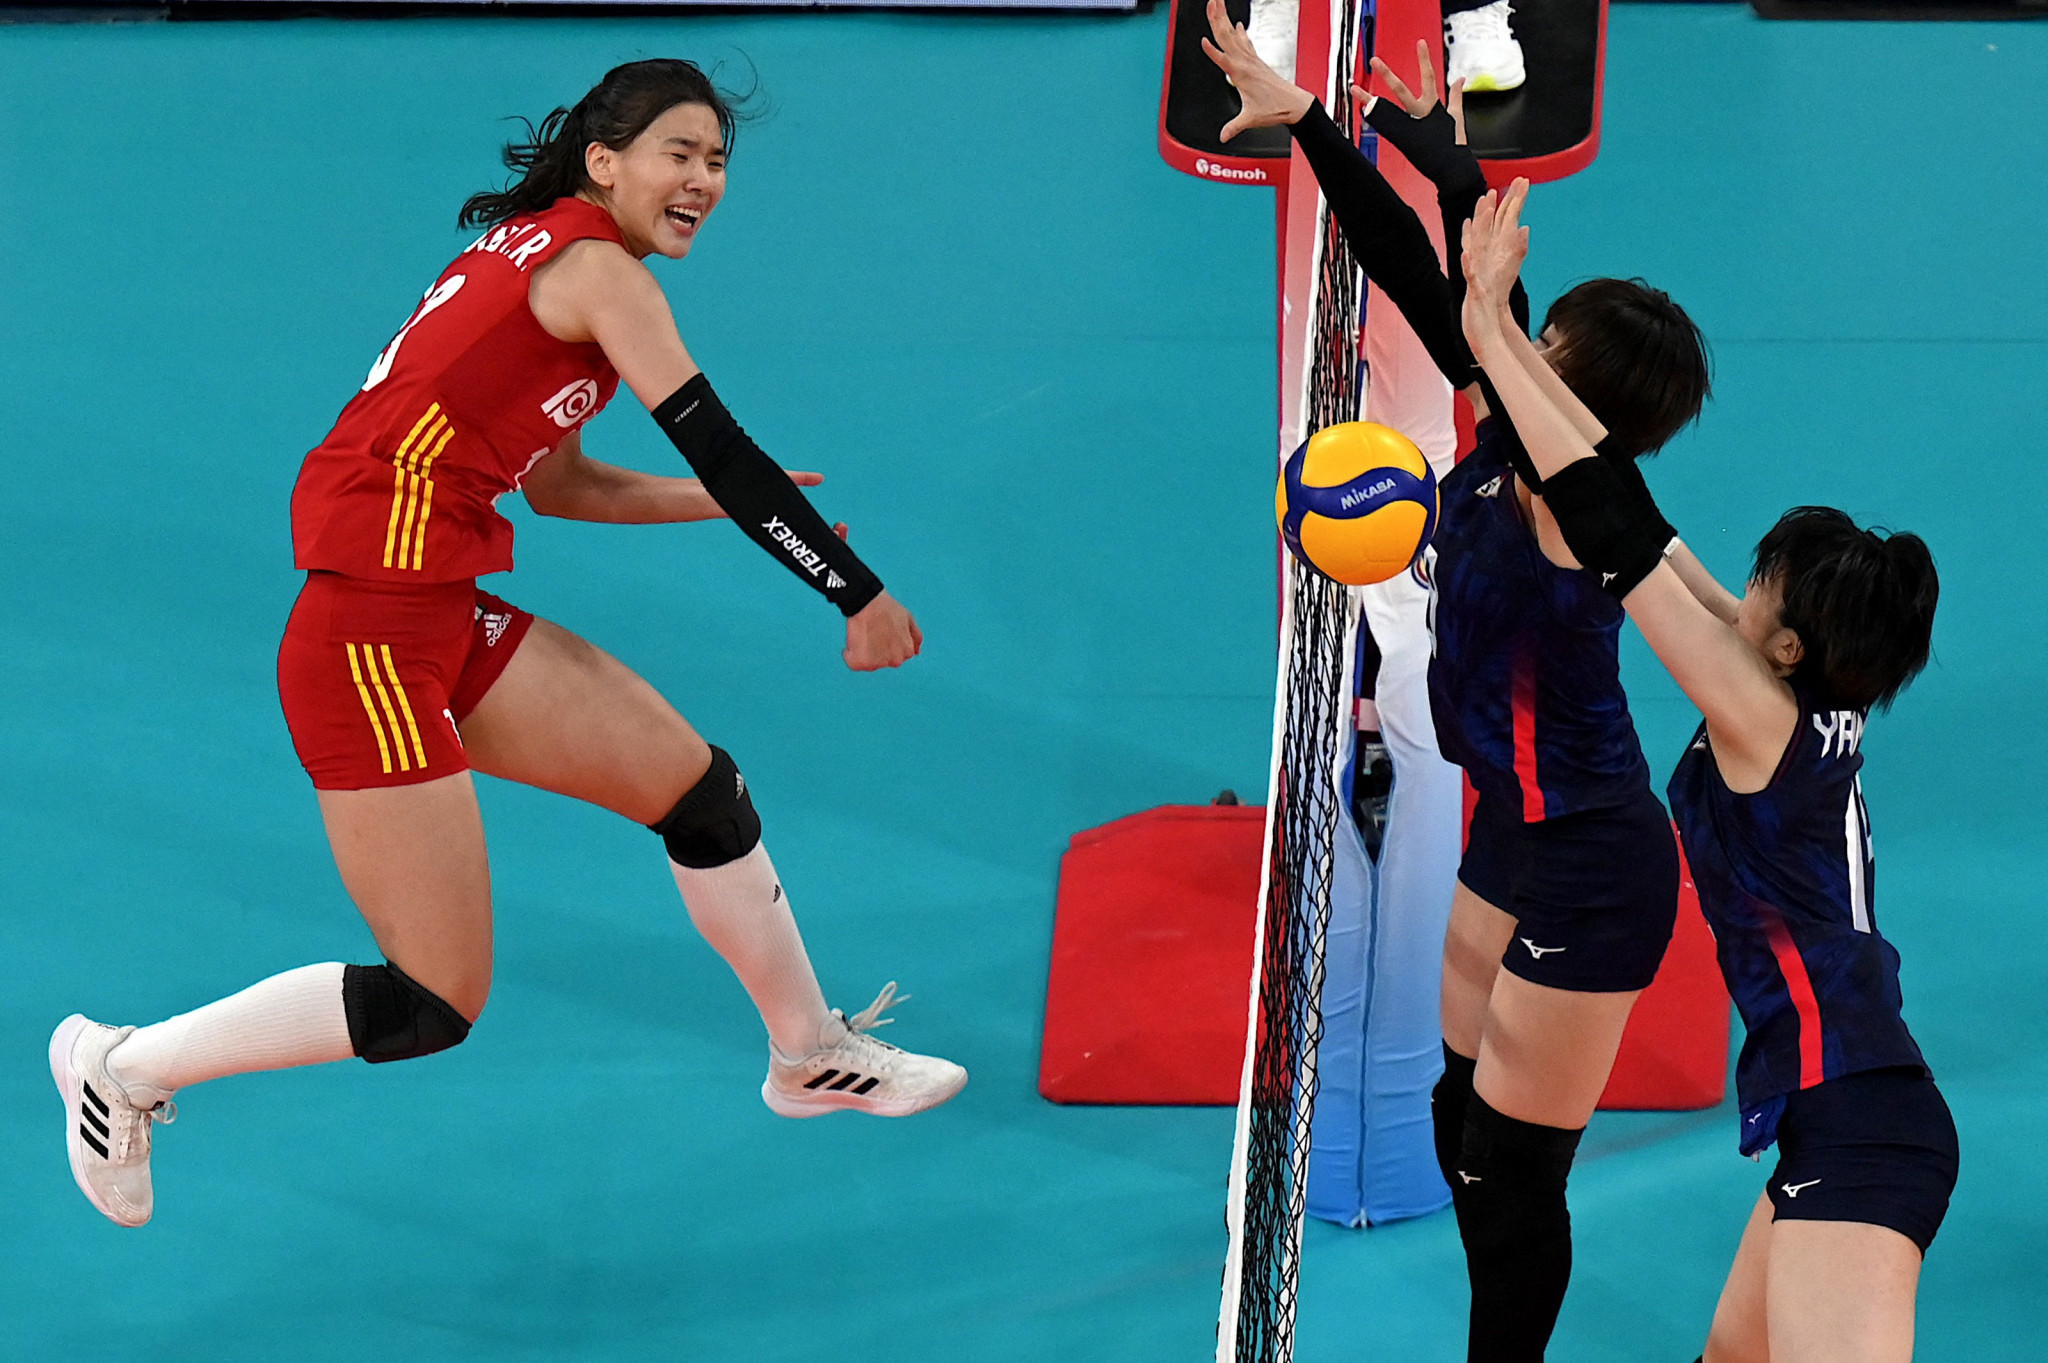 Six Paris 2024 places on offer at women’s volleyball qualifiers